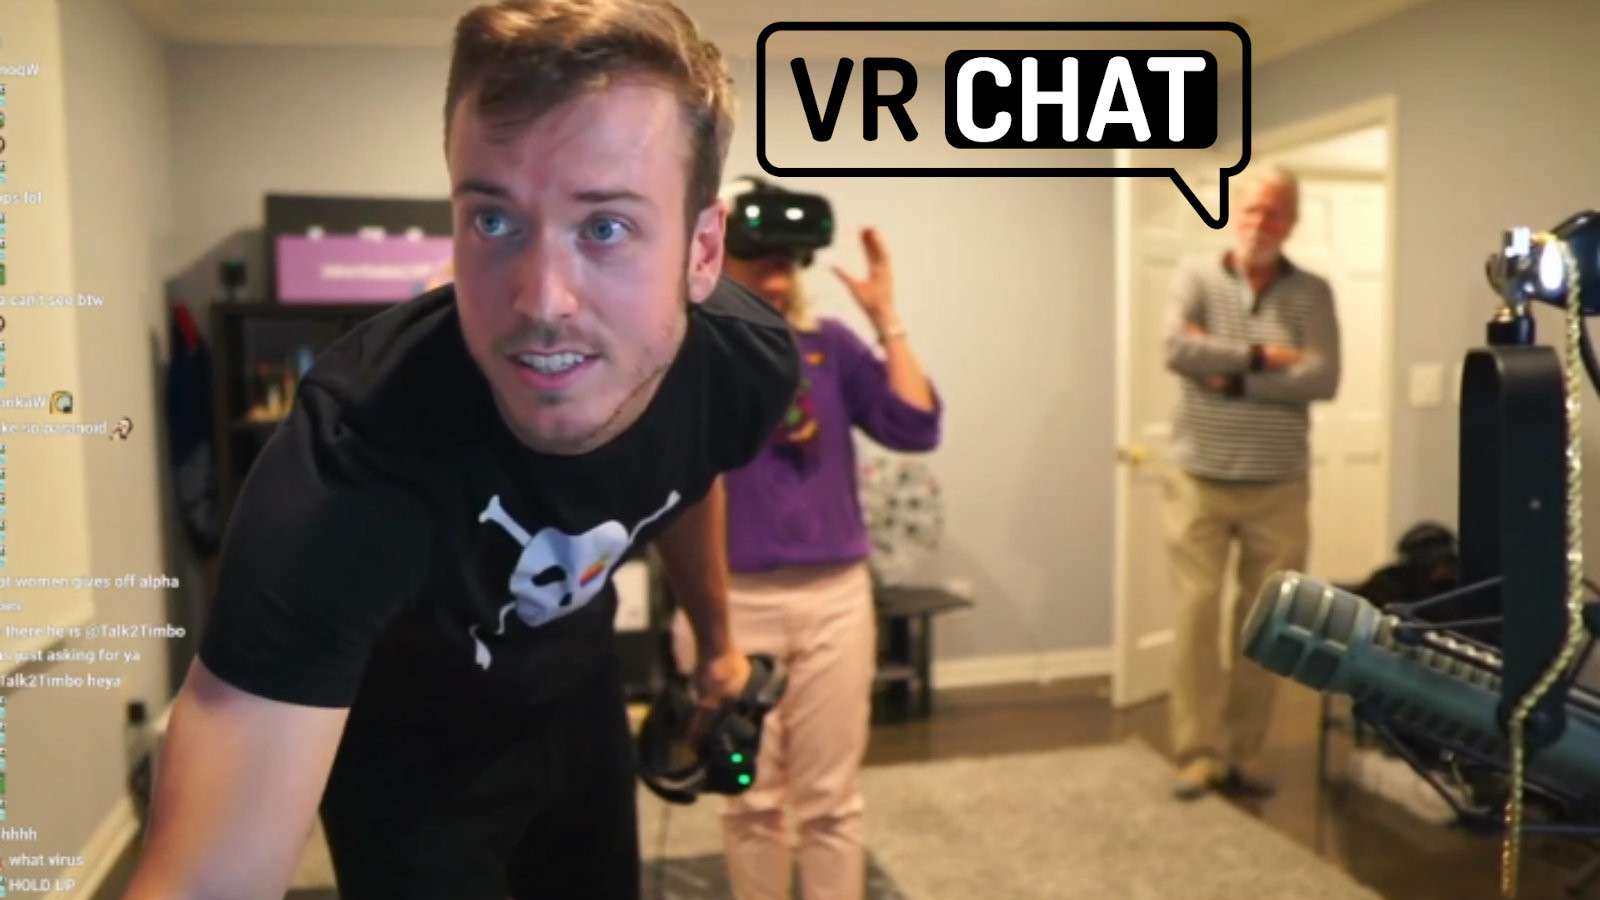 Twitch streamer JakeNBake and his parents in VR